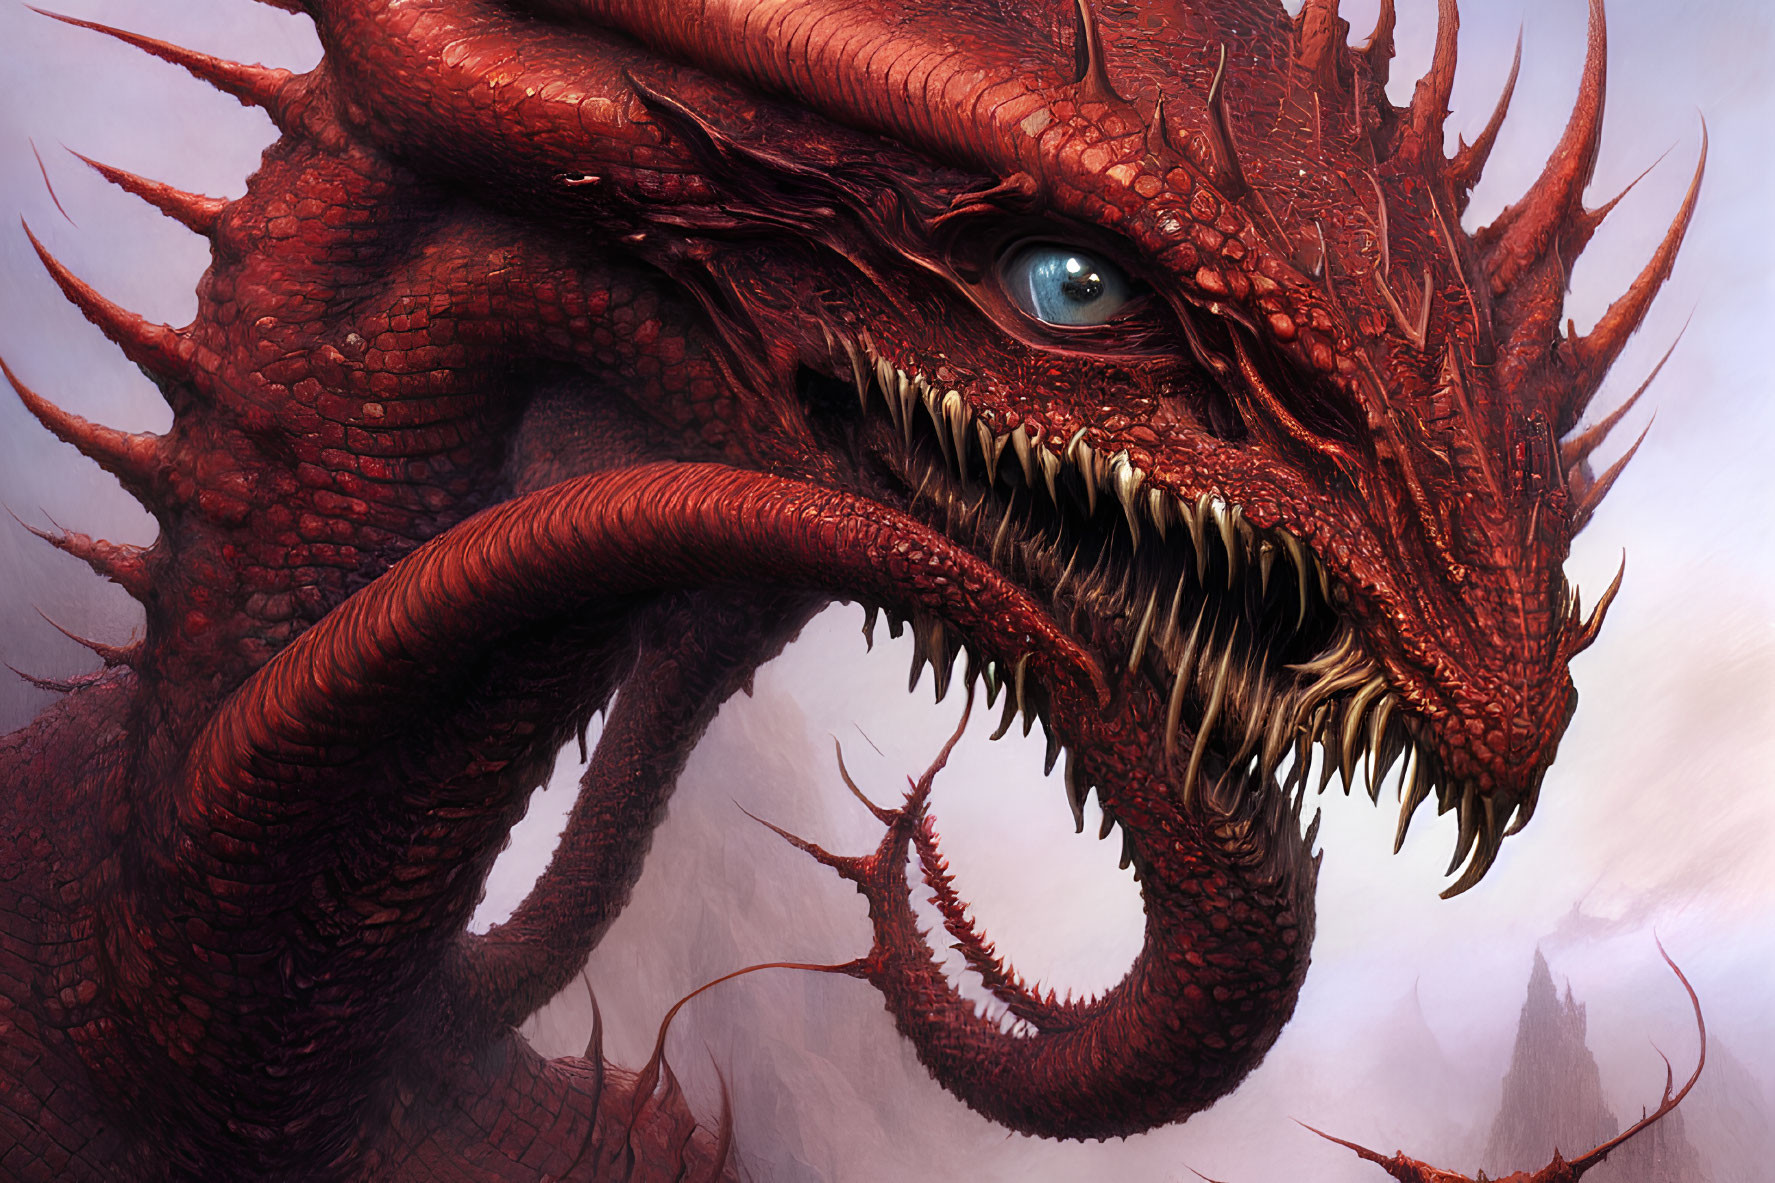 Detailed Close-Up of Fierce Red Dragon with Multiple Horns and Blue Eye